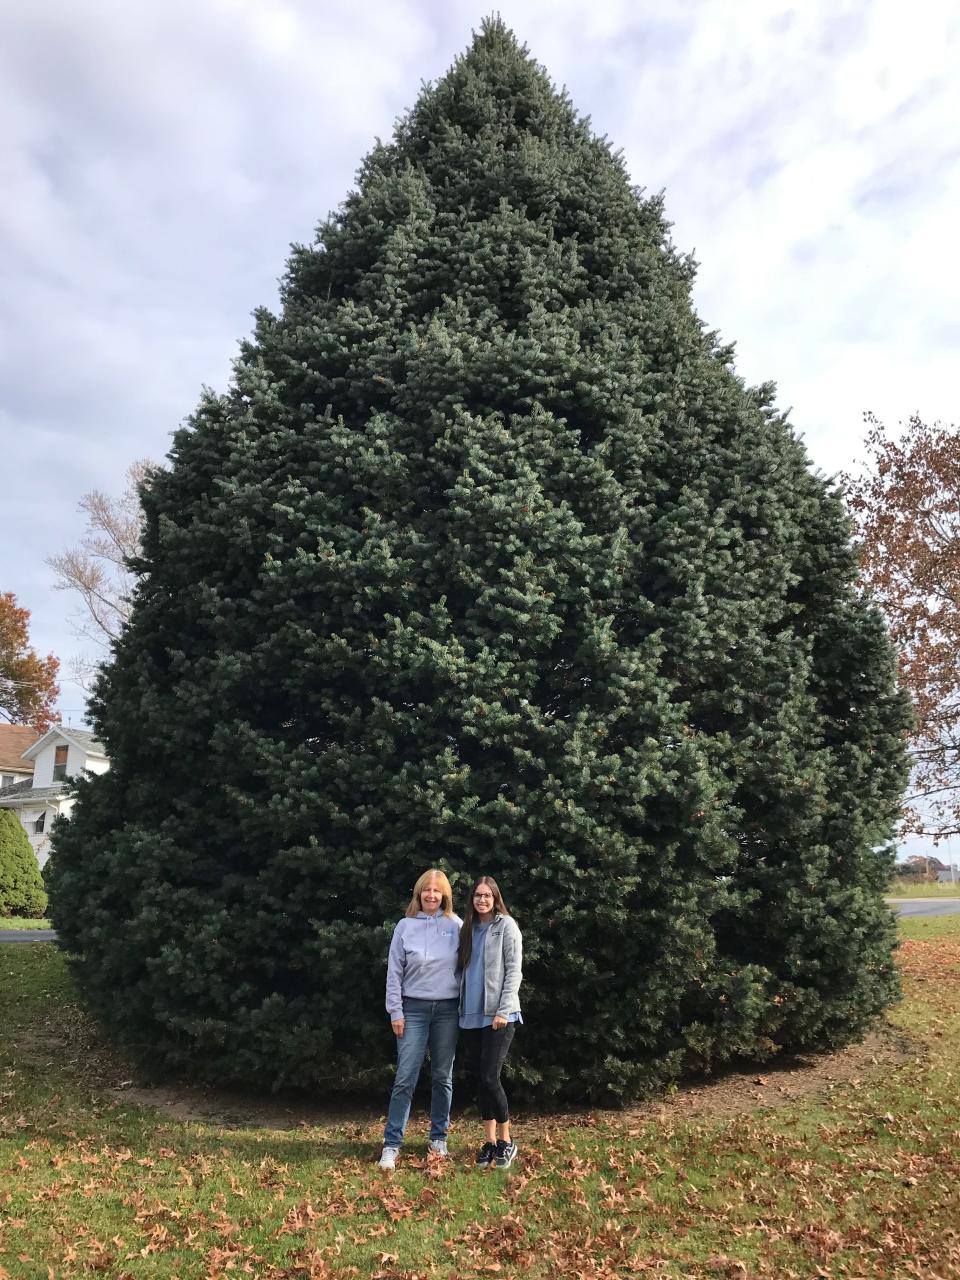 Chris Frontz (left) and Amye Frontz stand in front of the tree before it is chopped down.